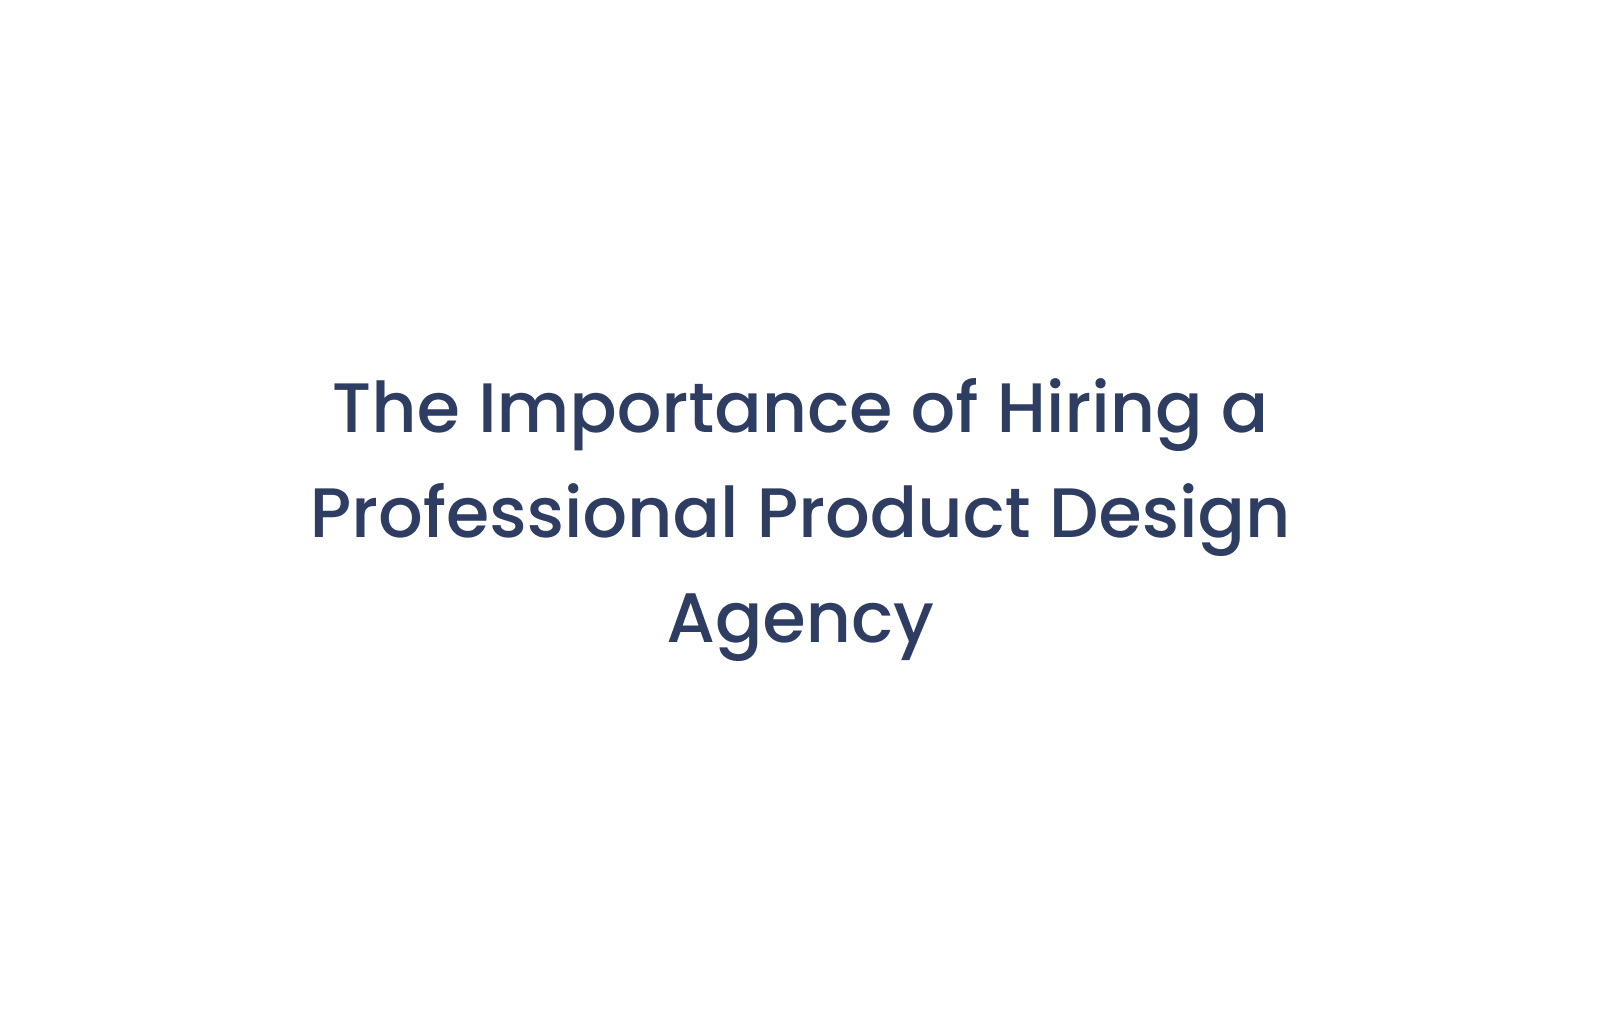 The Importance of Hiring a Professional Product Design Agency